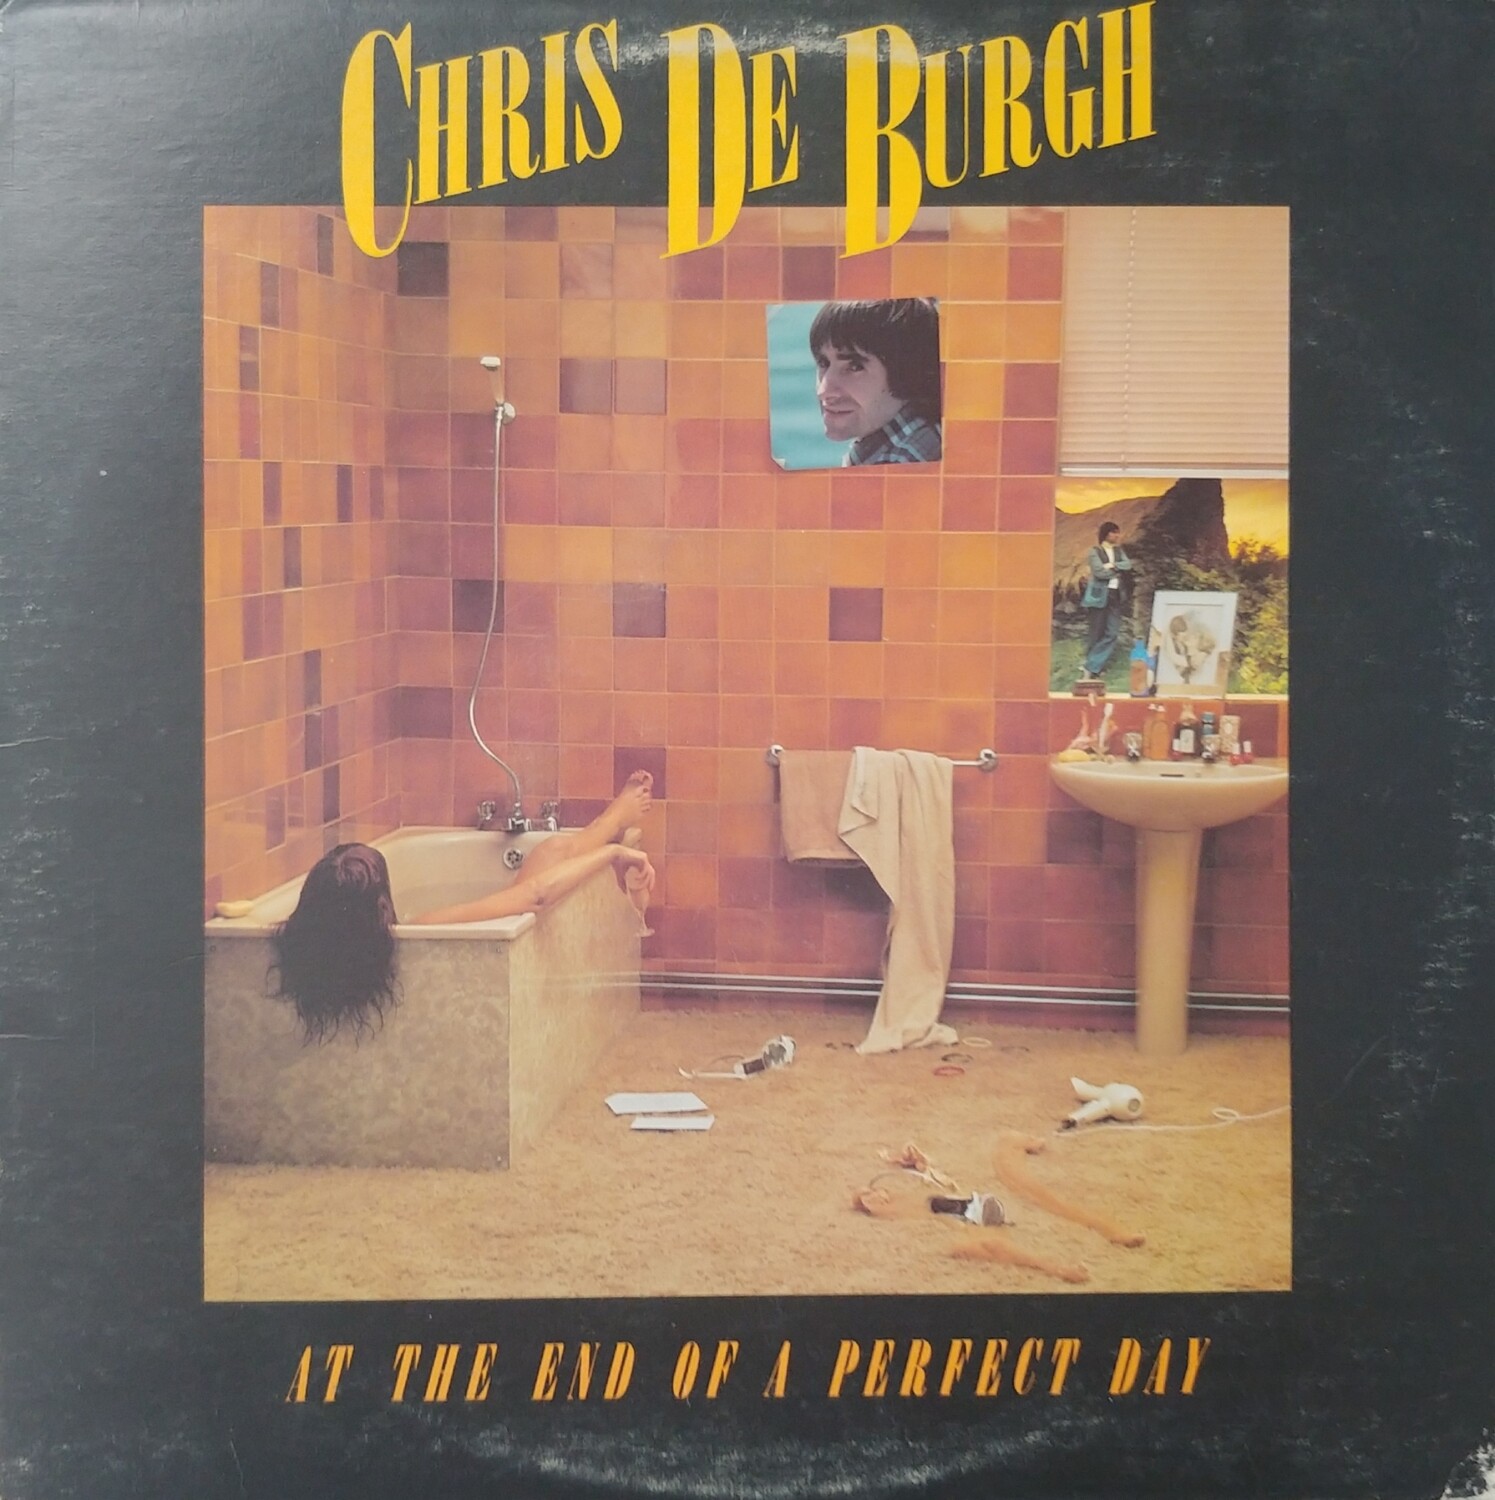 Chris De Burgh - At the end of a perfect day